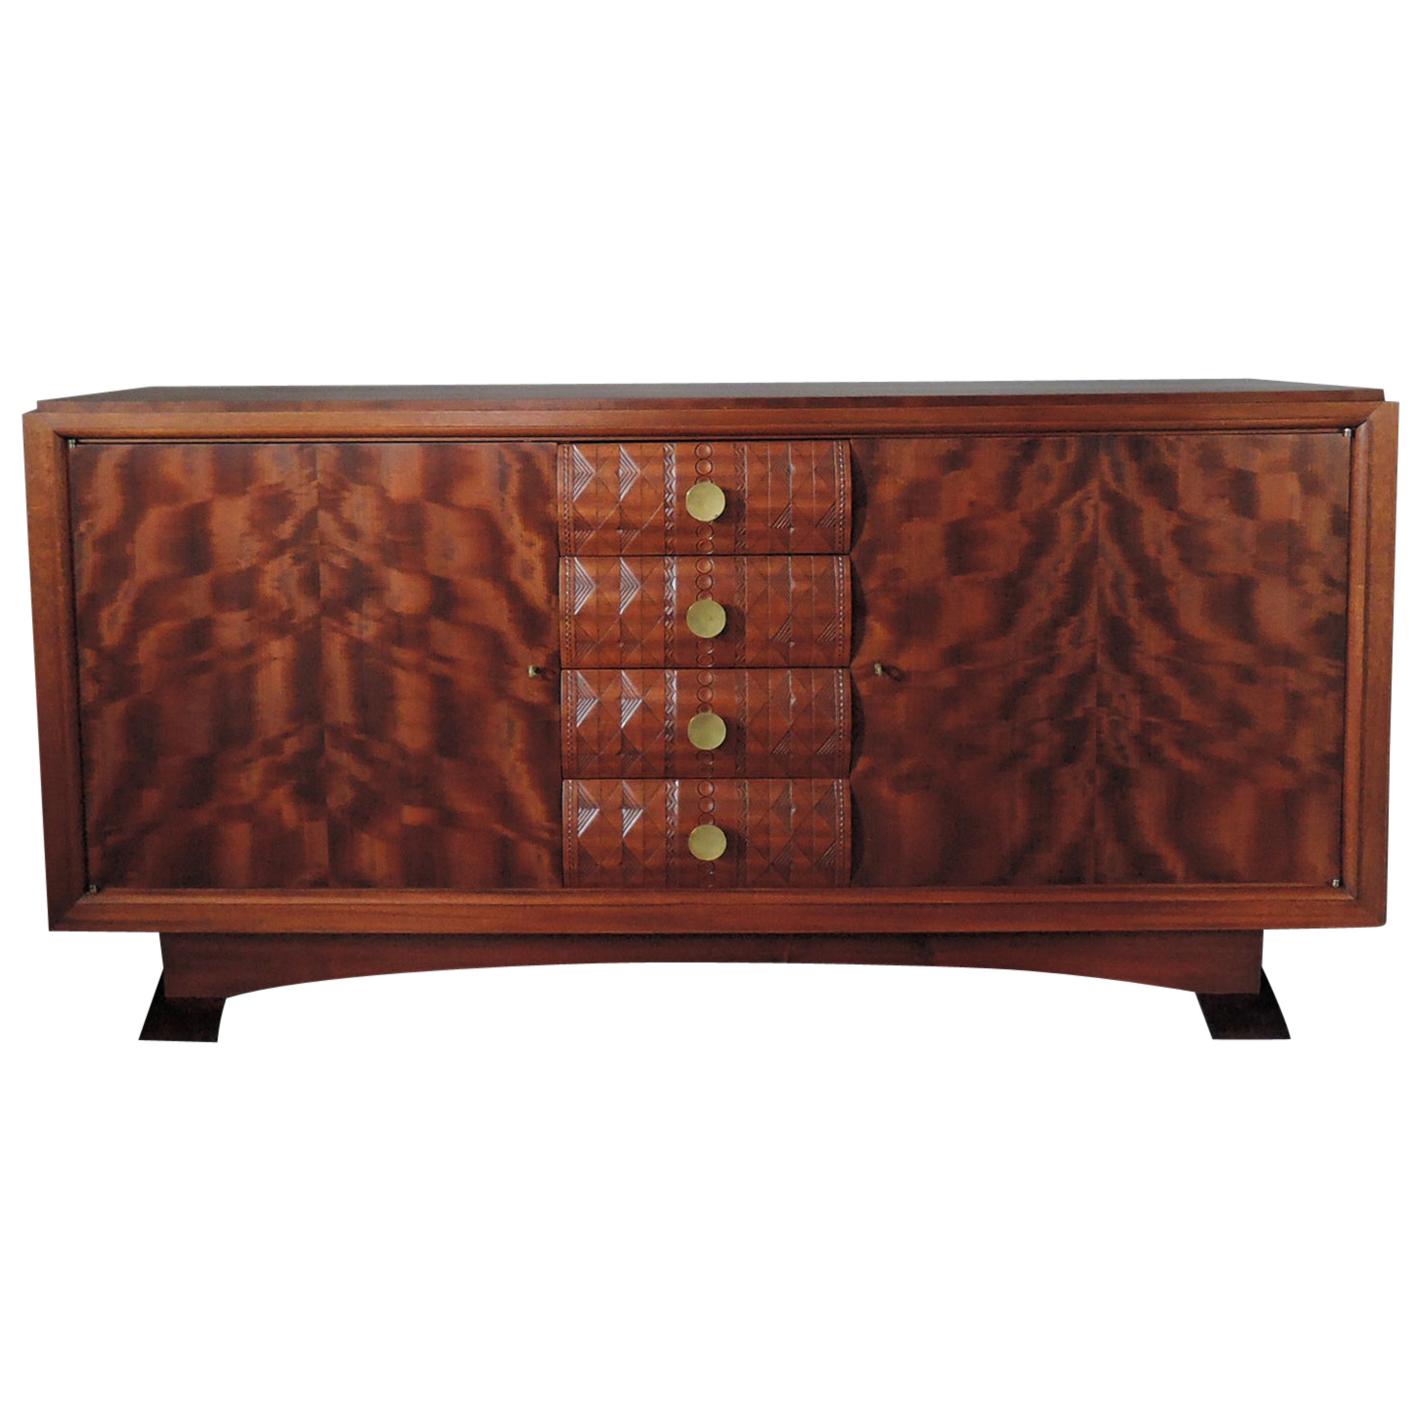 Fine French Art Deco Mahogany Sideboard by Albert Guenot for "Atelier Pomone" For Sale